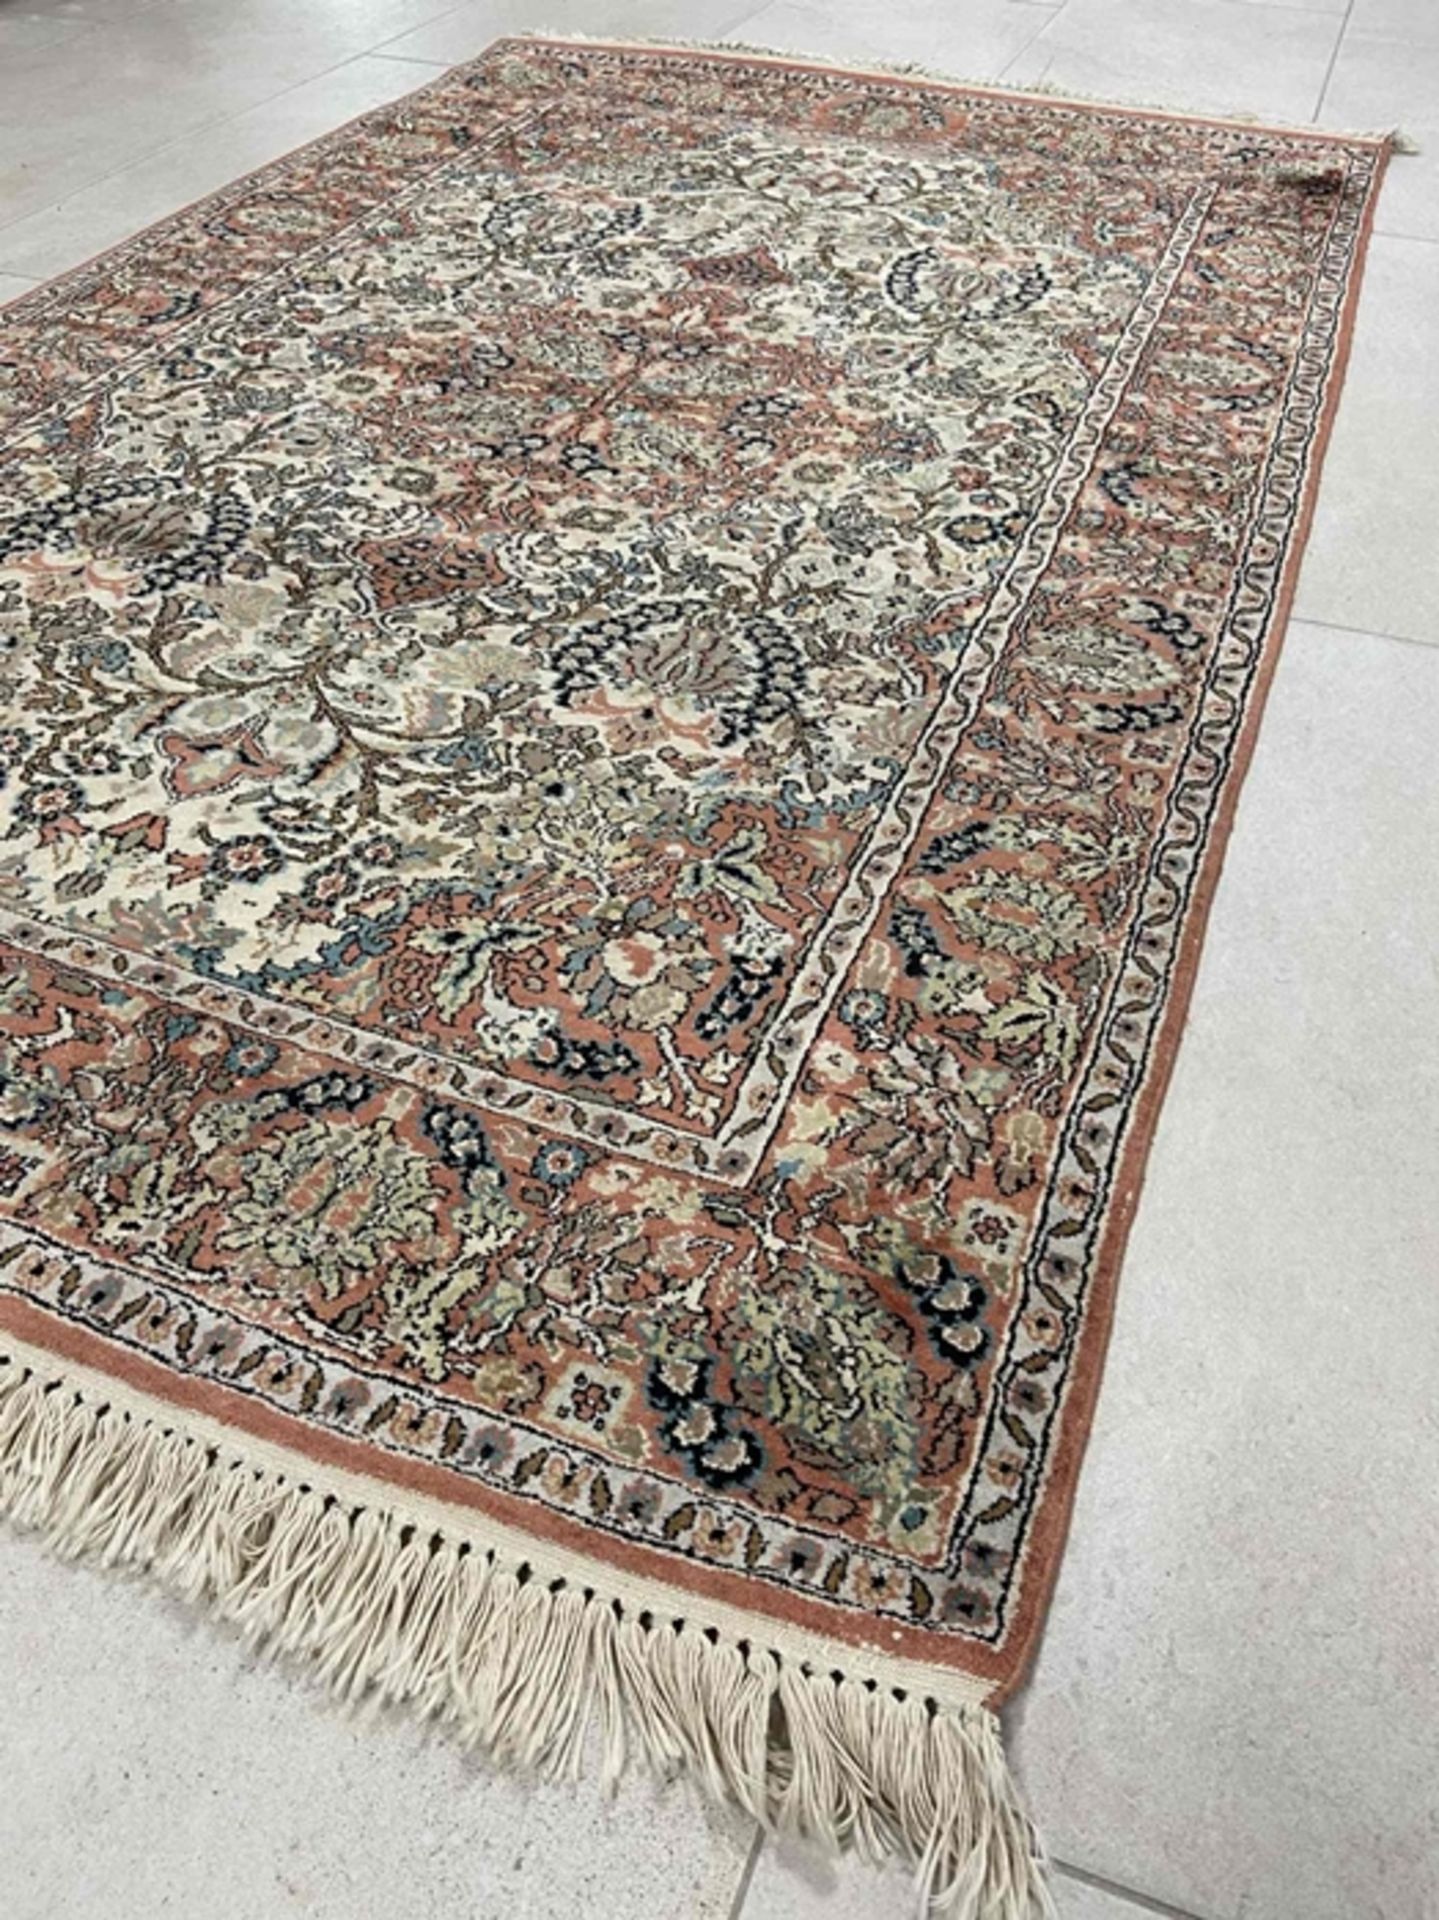 Handknotted silk carpet, cashmere - Image 2 of 4